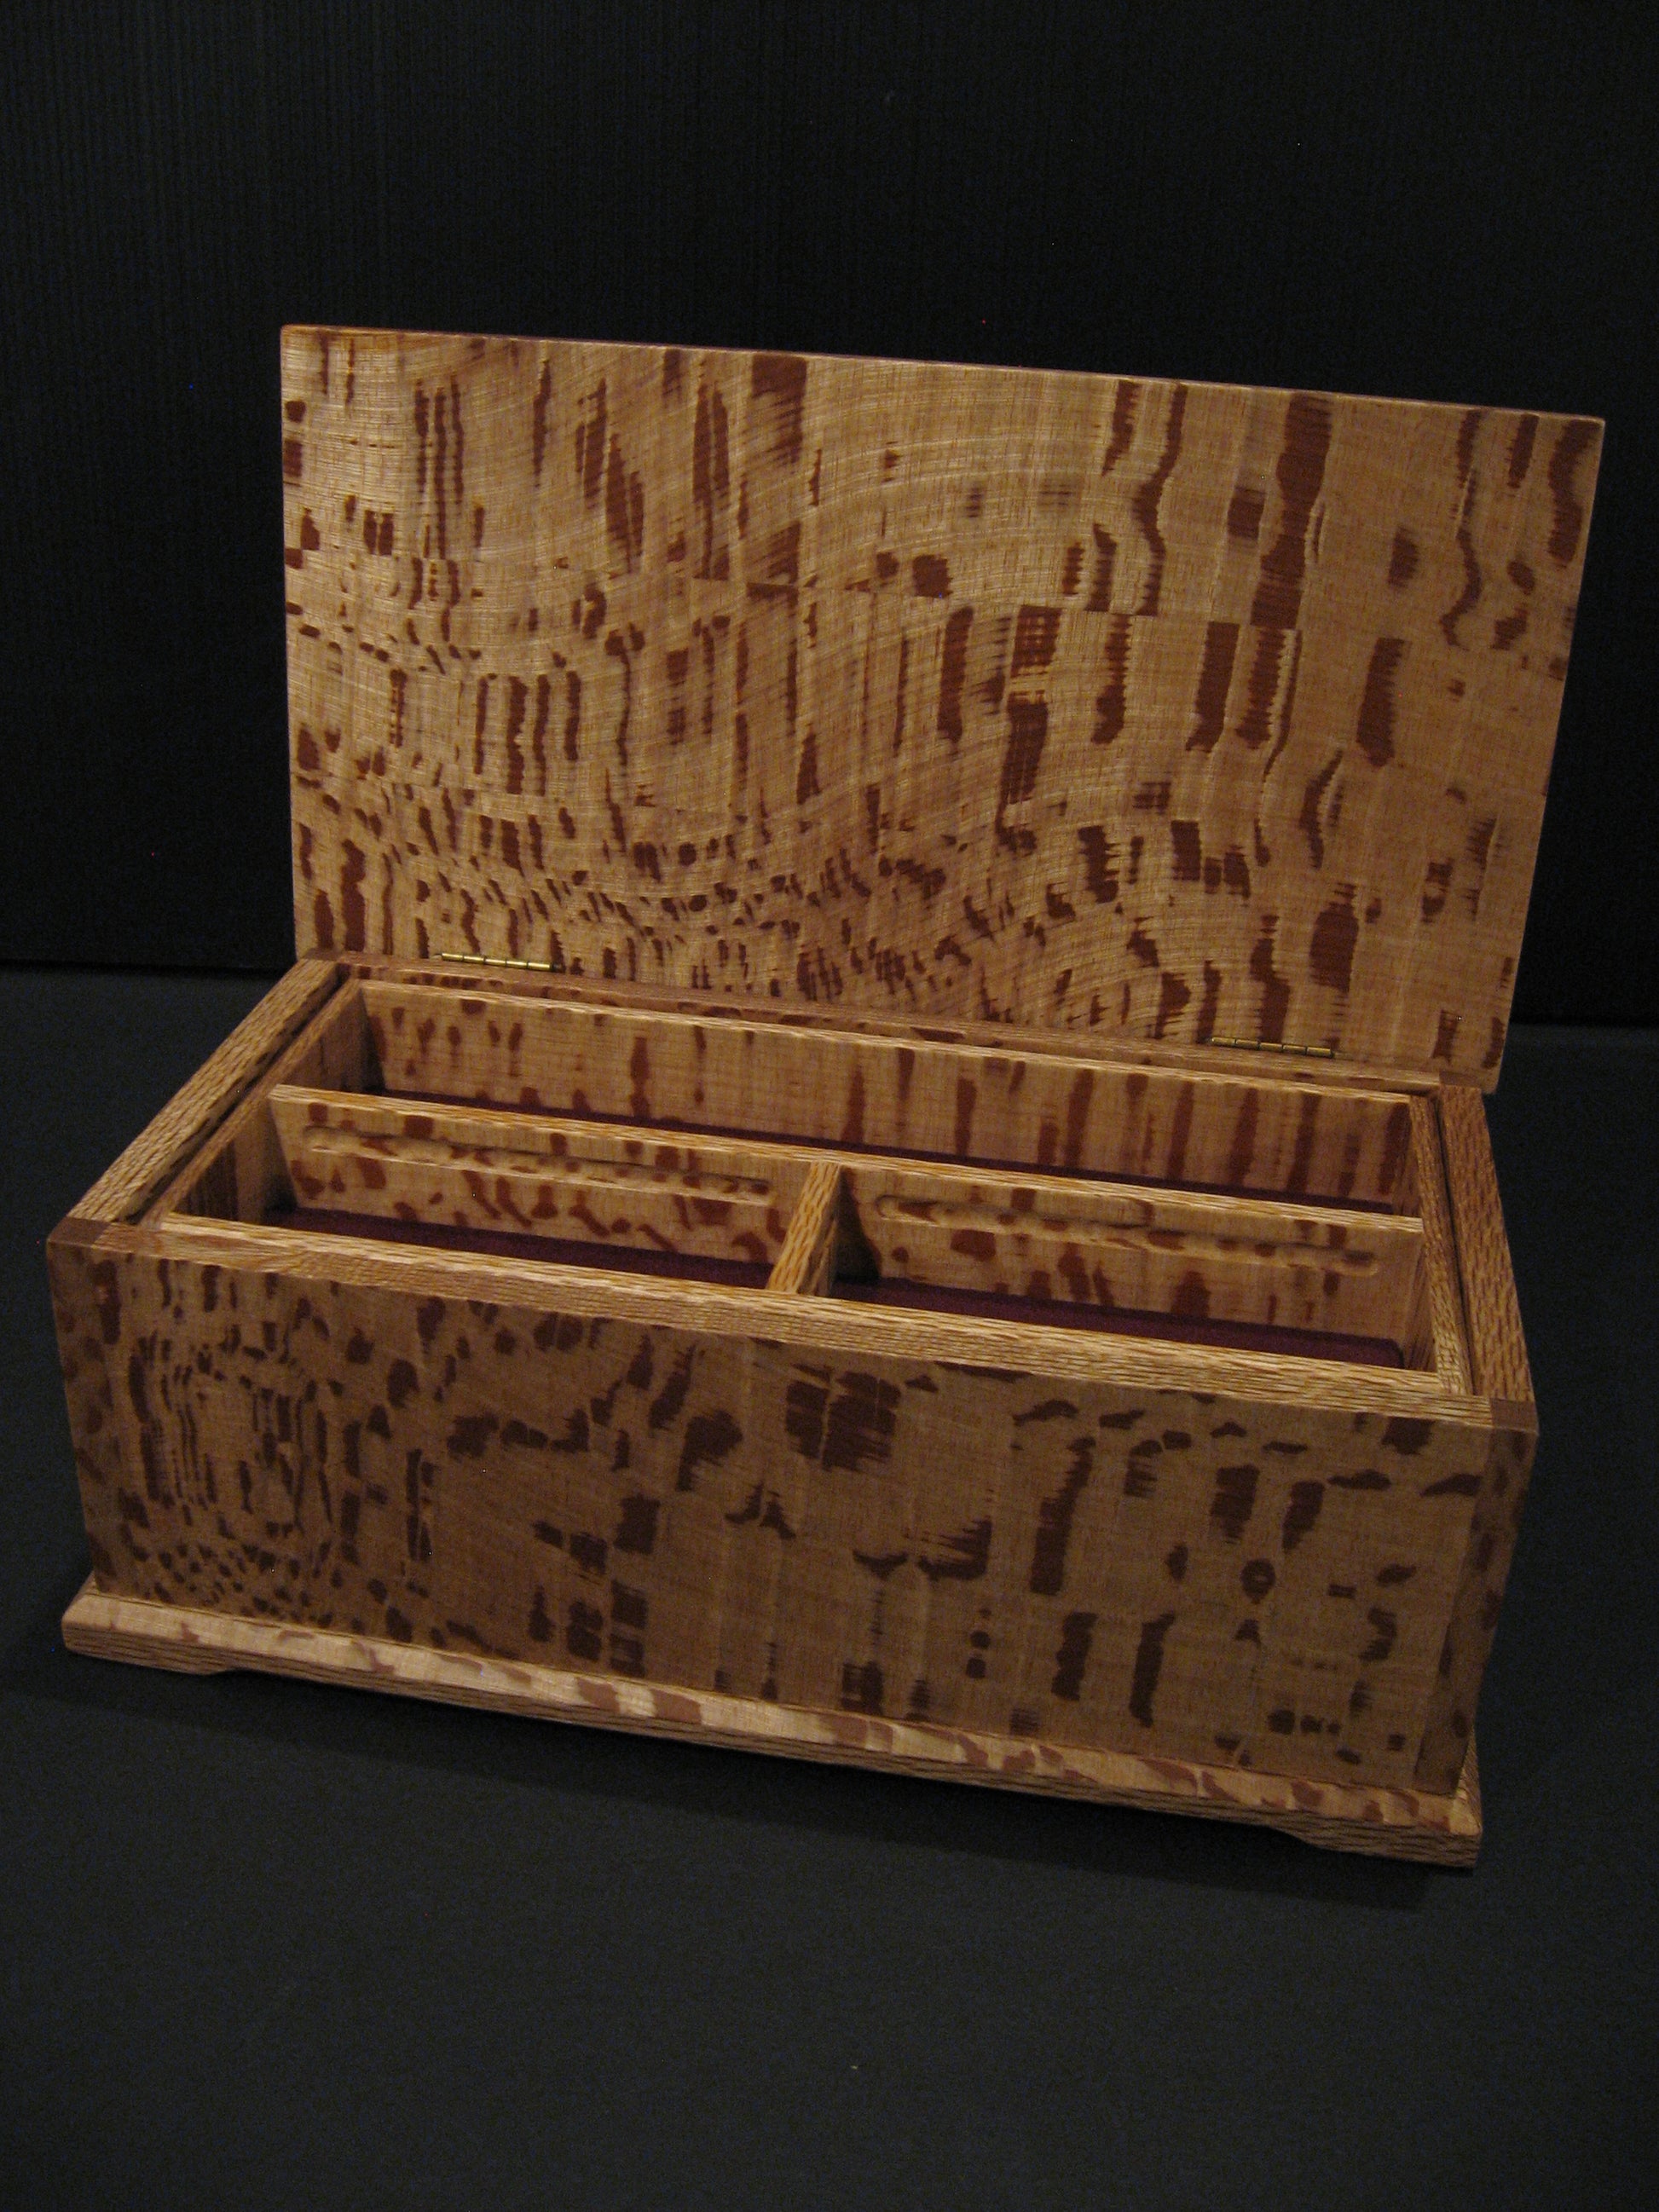 Inside of Deluxe Rewarewa Wooden Jewellery Box by Timber Arts formerly Sovereign Woodware NZ Silver Fern Gallery